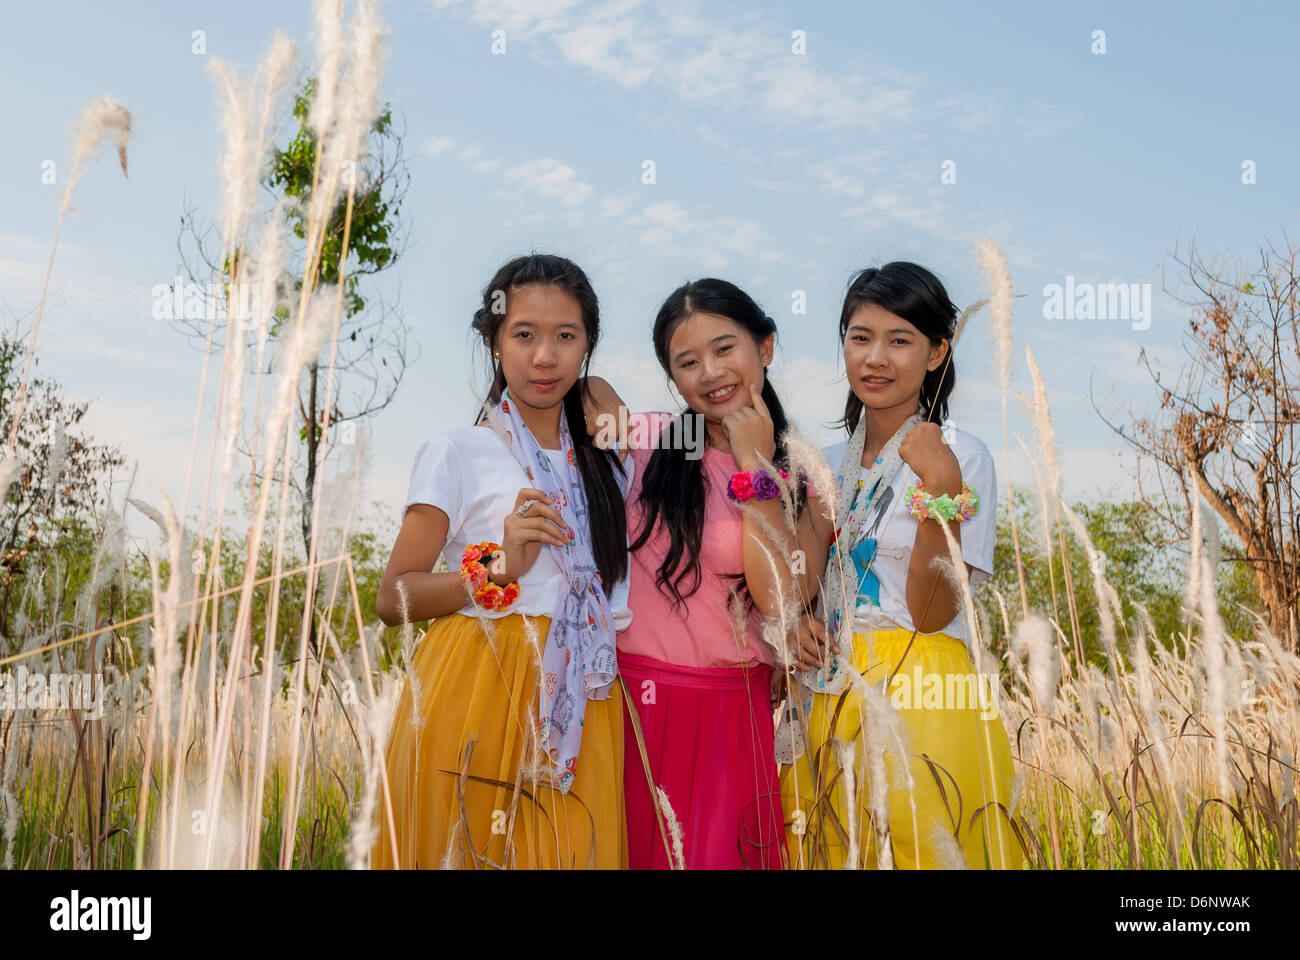 Asian Thai girls are standing together in the field. Stock Photo